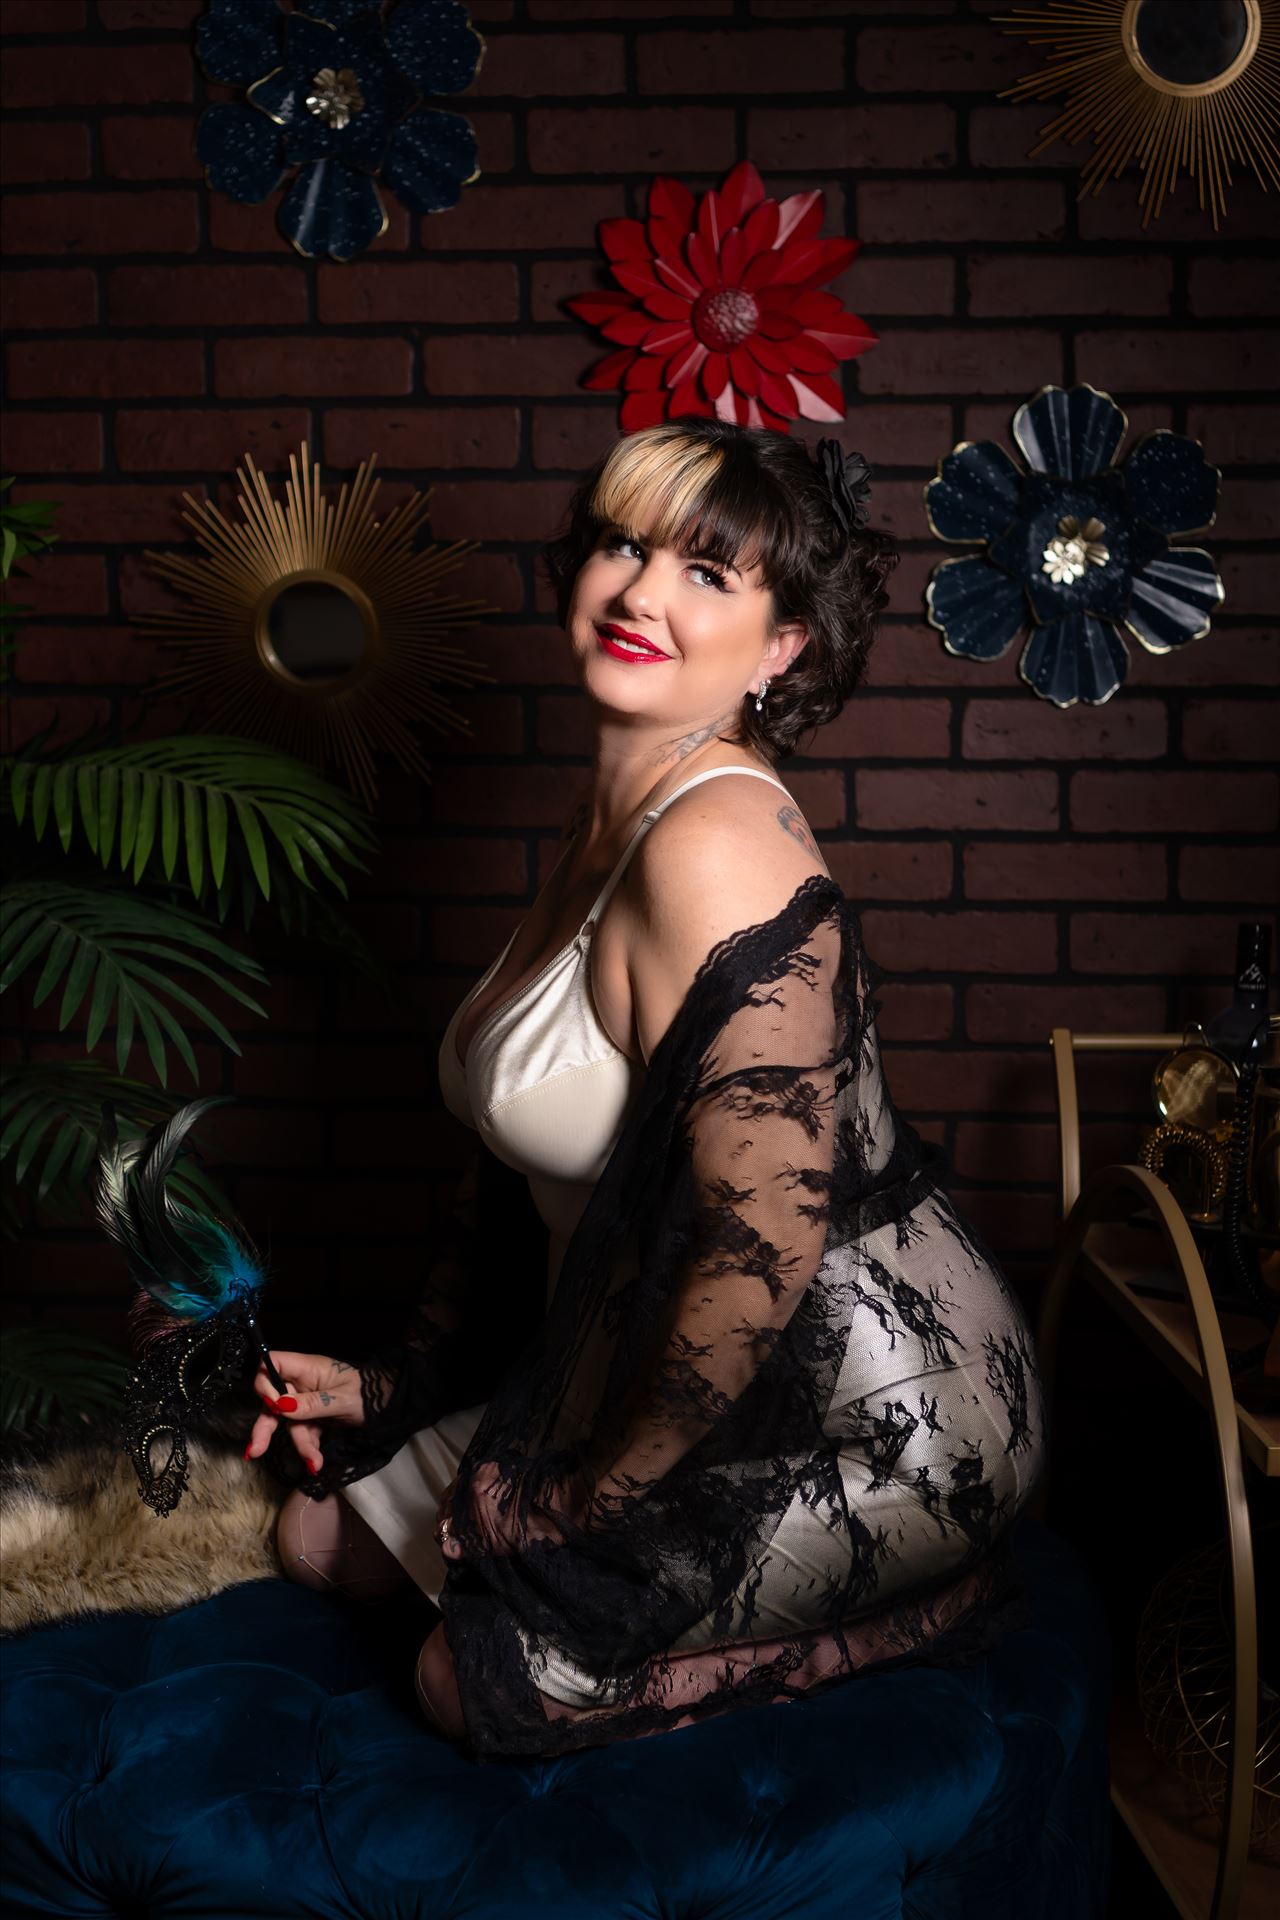 Final--6.jpg - Beachfront Boudoir by Mirror's Edge Photography is a Boutique Luxury Boudoir Photography Studio located in San Luis Obispo County. My mission is to show as many women as possible how beautiful they truly are! Betty Page Boudoir Retro 60's Chic by Sarah Williams